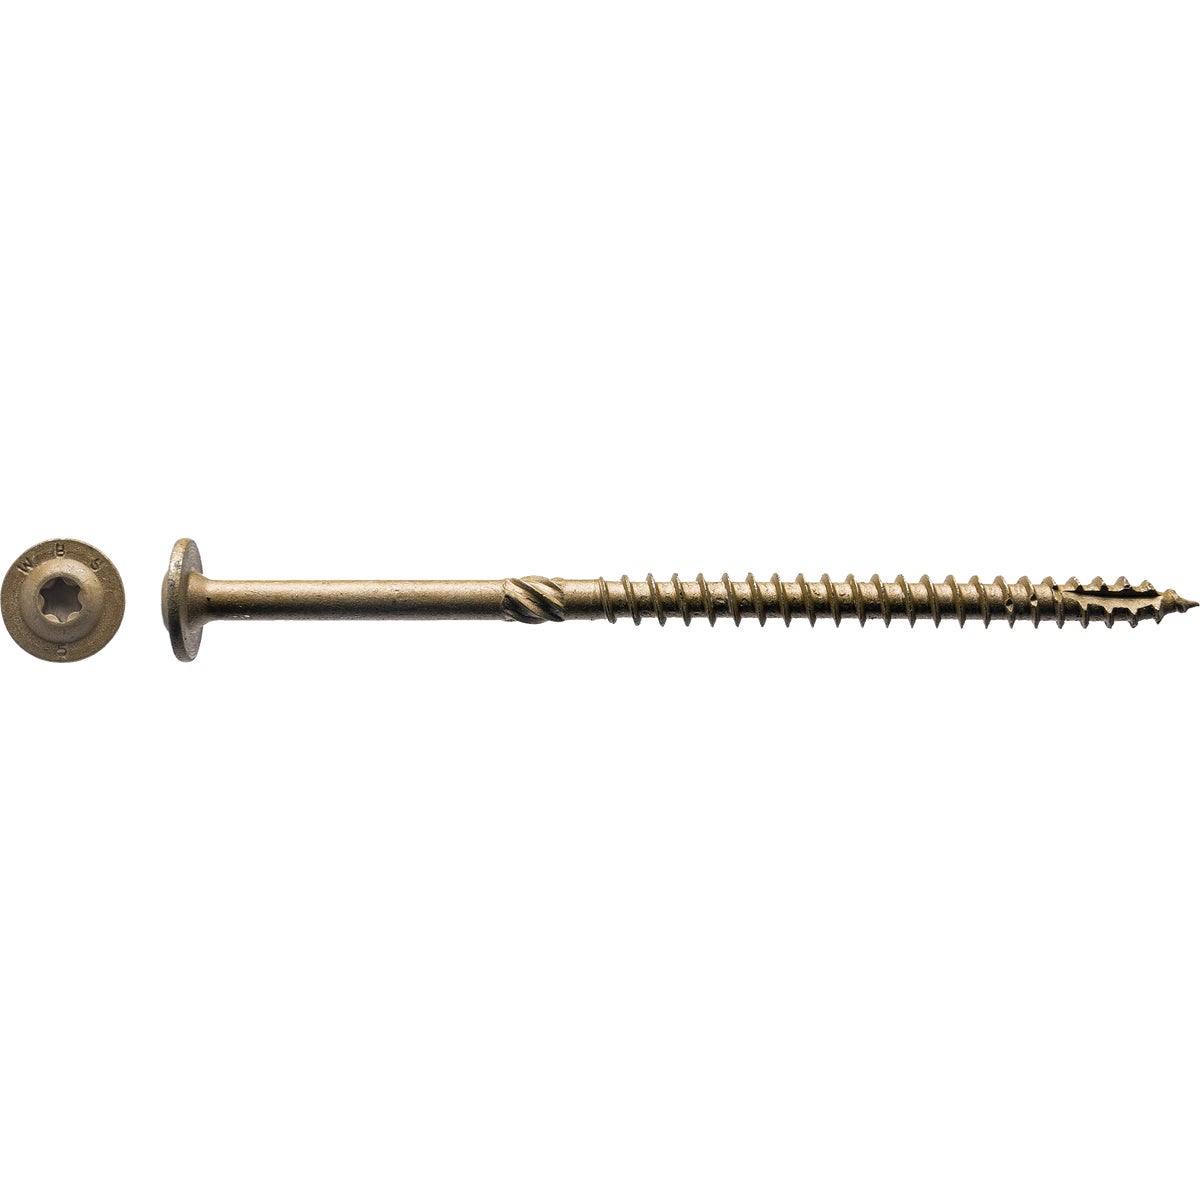 Big Timber #15 x 6 In. Structure Screw (300 Ct.)